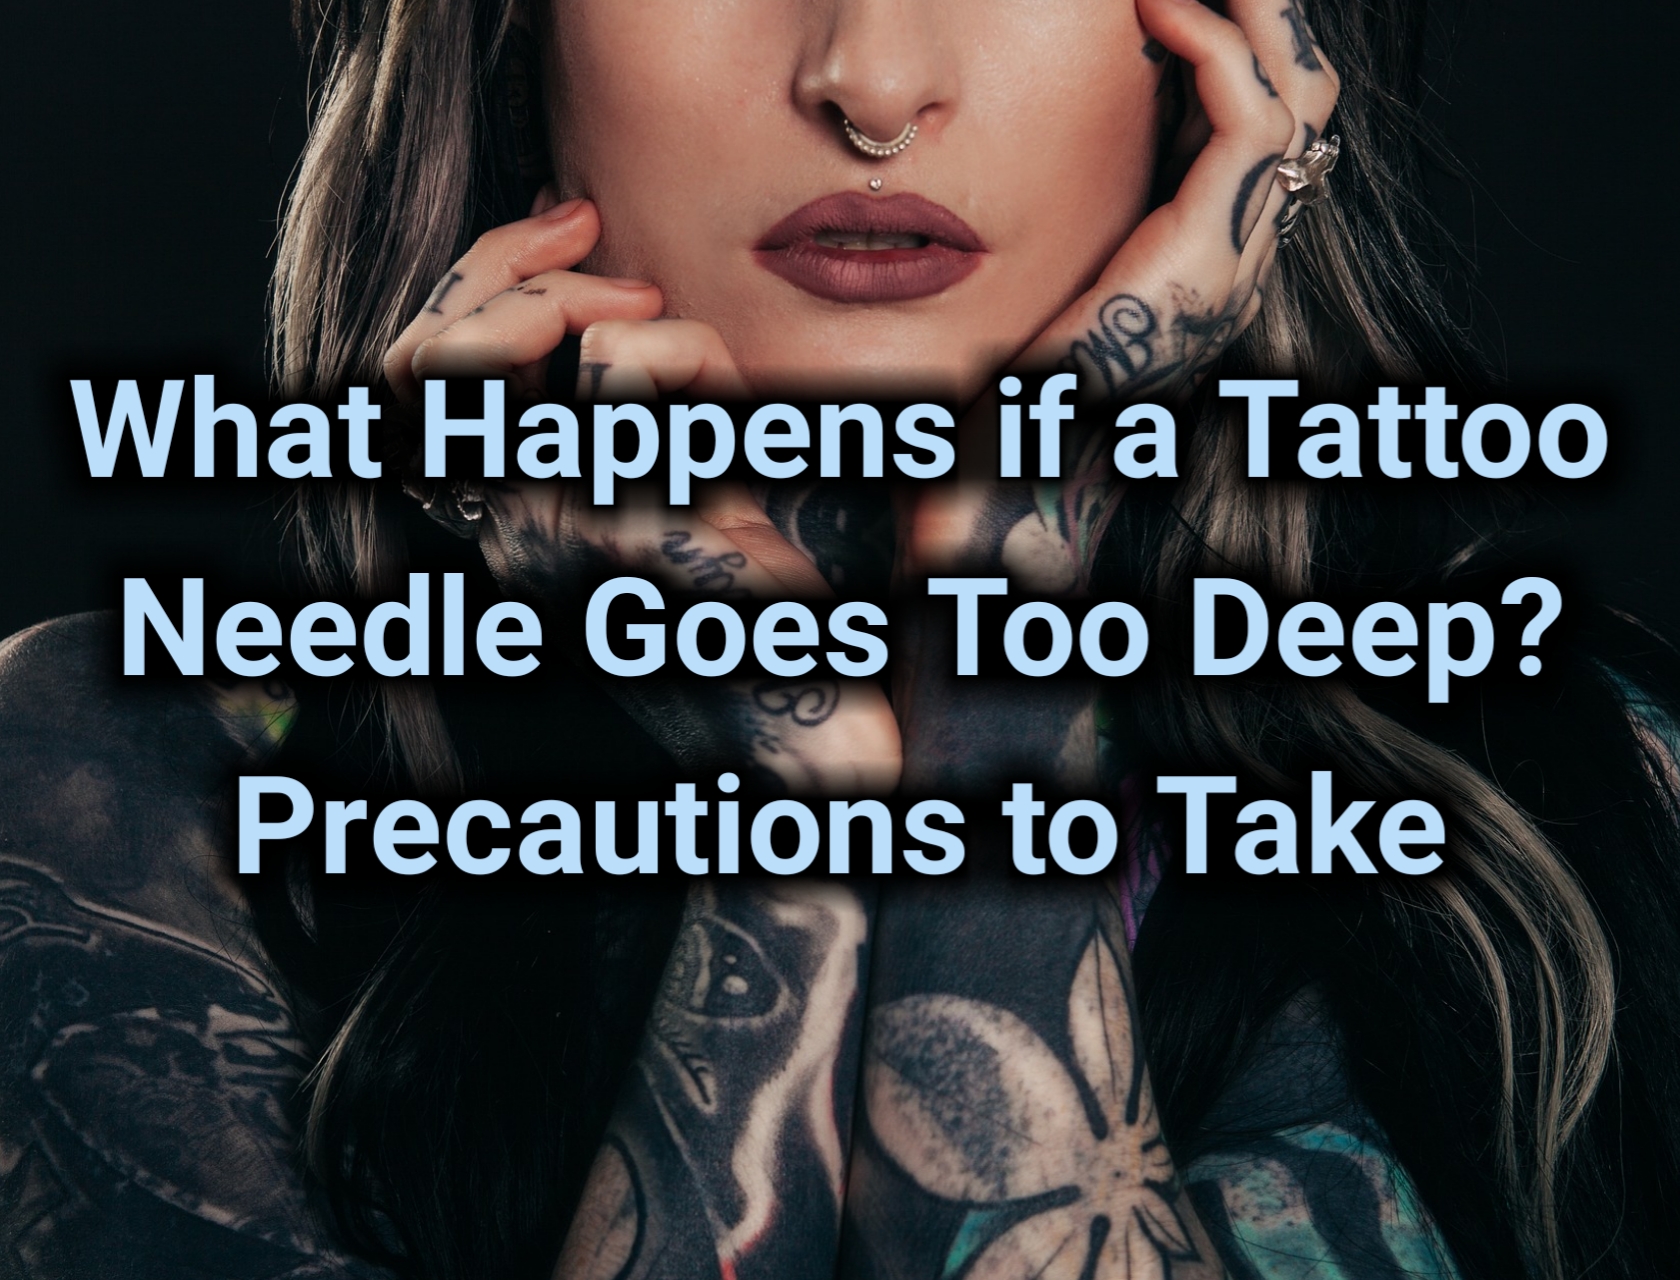 What Happens if a Tattoo Needle Goes Too Deep